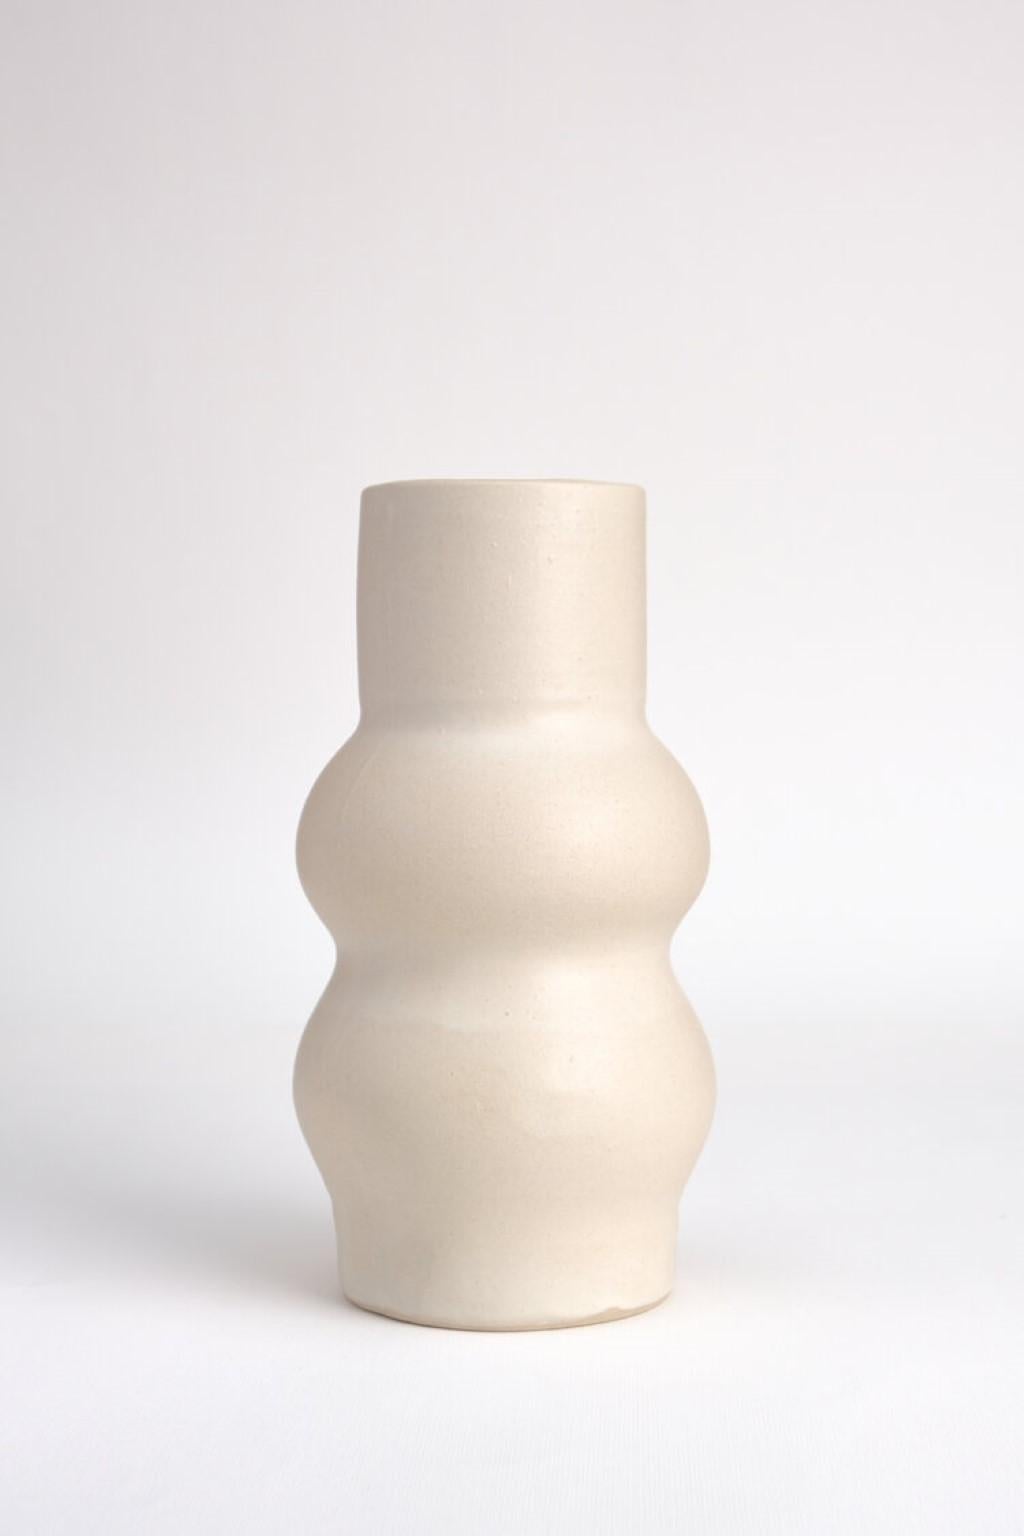 Unique stoneware vase femme II by Camila Apaez.
Unique 
Materials: Stoneware
Dimensions: 8 x 8 x 22 cm
Also available in white bone, chocolate, buttermilk, charcoal black, glossy, spotted grey, pale opal, nube, glossy. 

This year has been